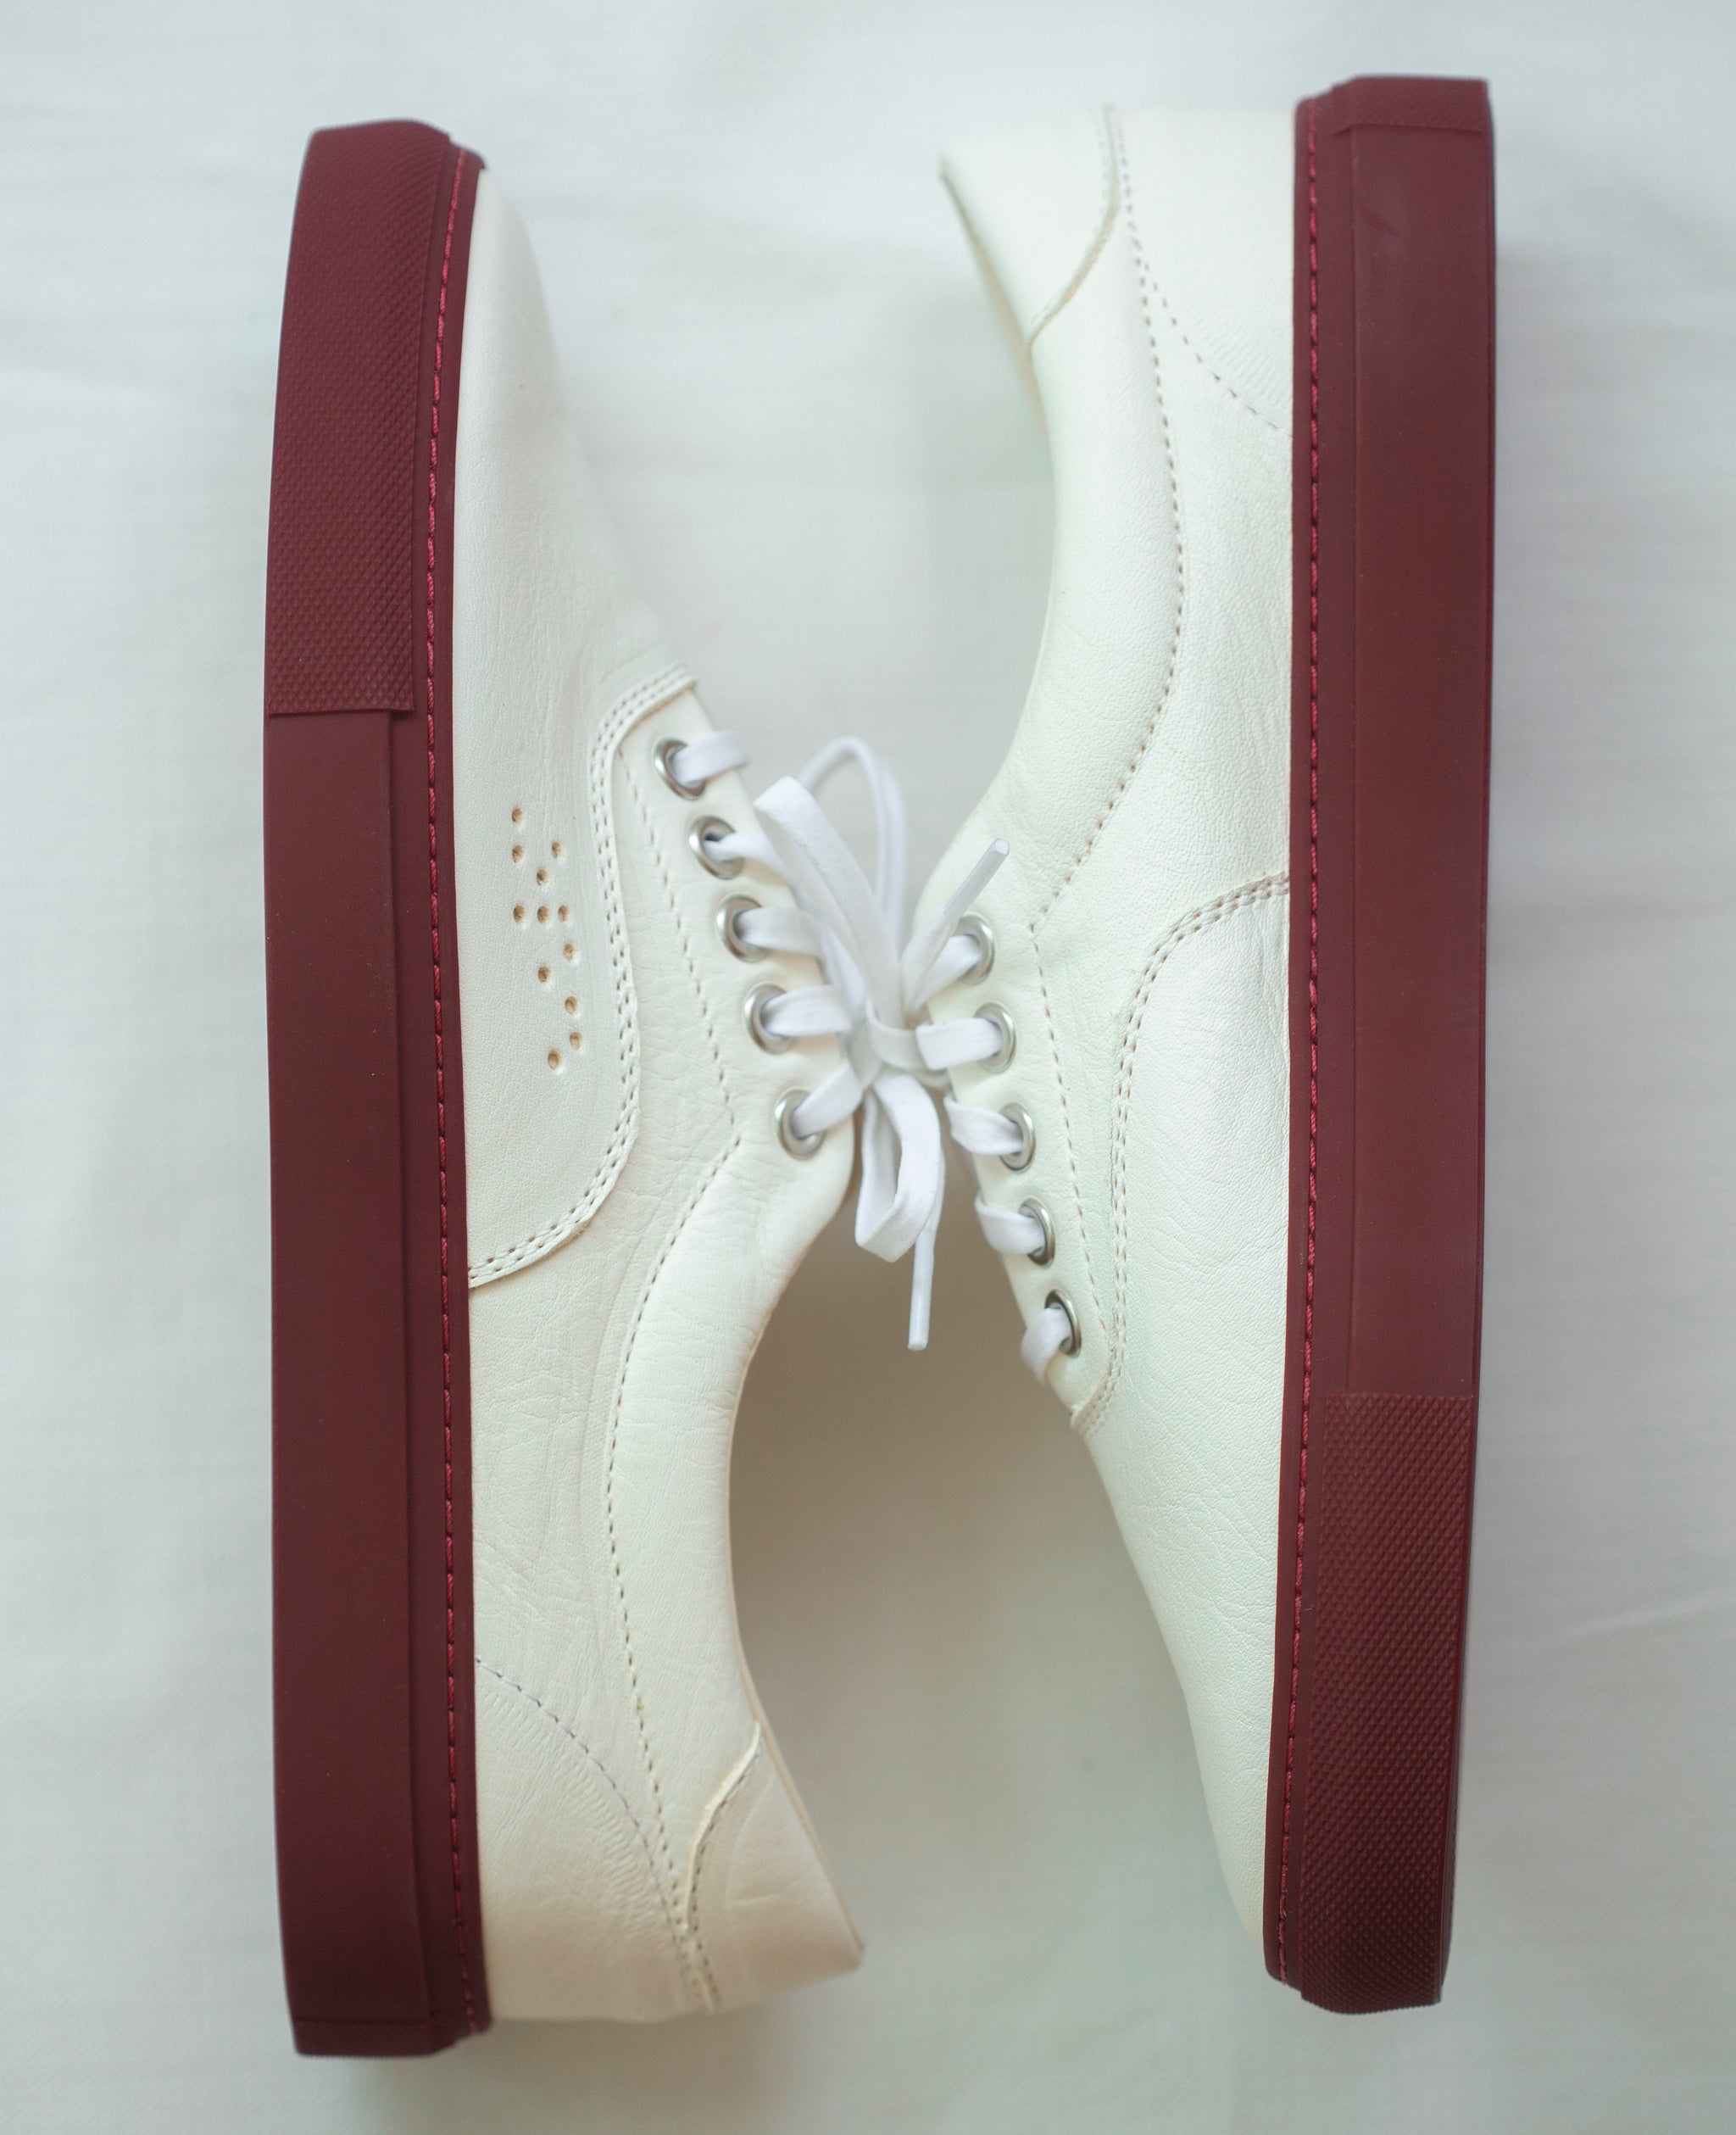 Opie Way x Raleigh Denim Shoes  White Leather